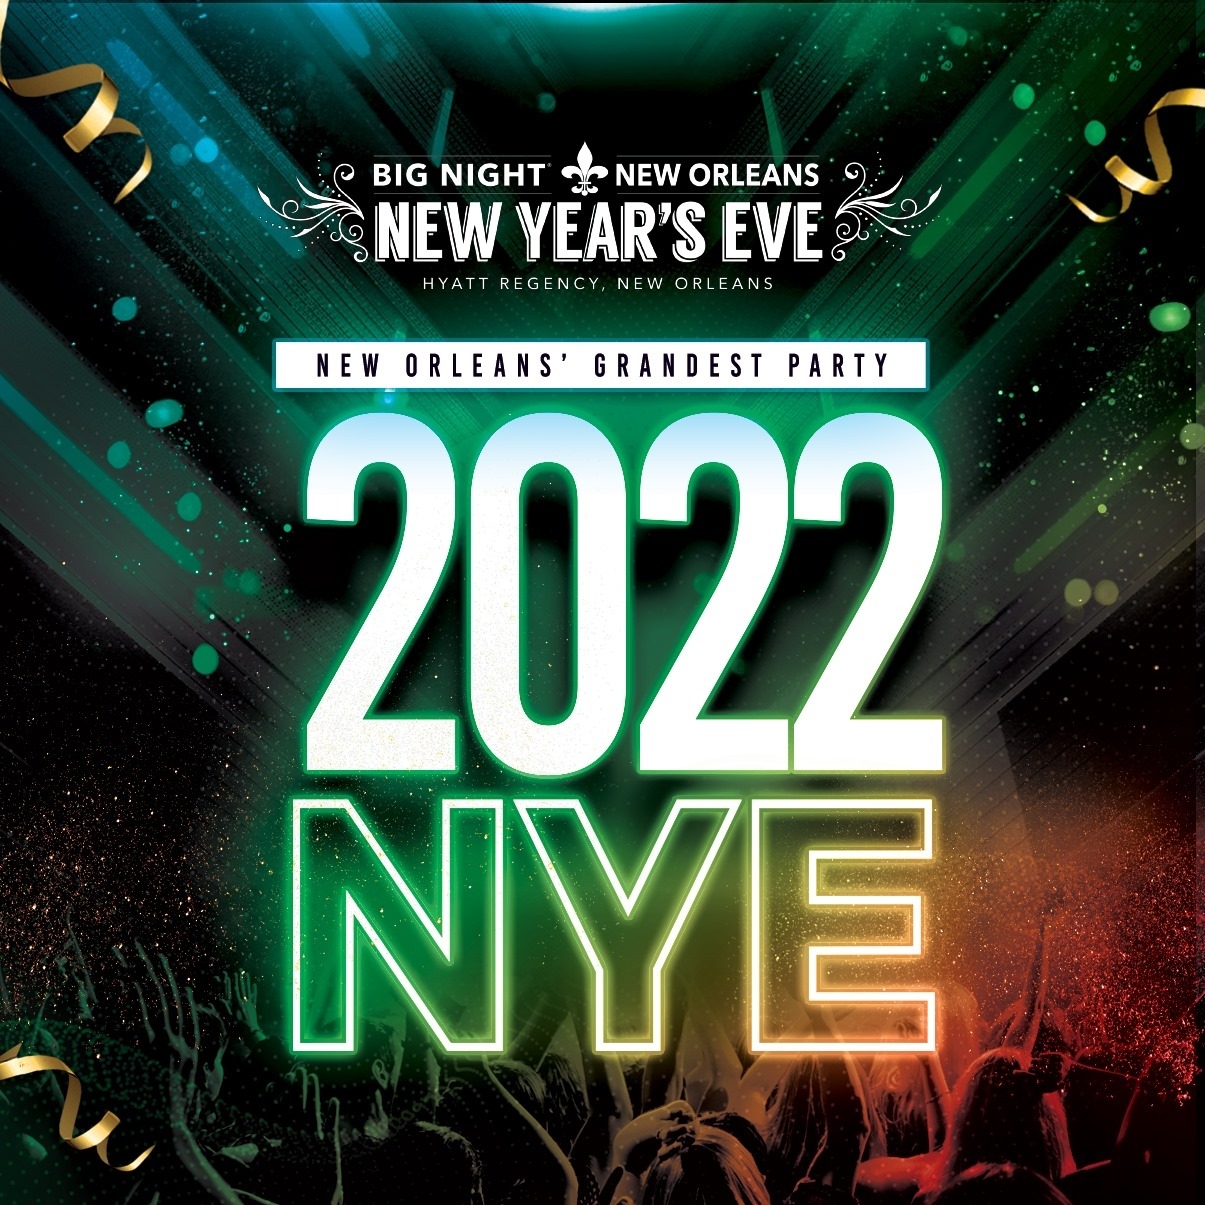 Big Night New Orleans NYE Promo Code, 2022, New Years Eve Party, Discount TIckets, GA, VIP Bottle Service, Best New Orleans NYE Parties